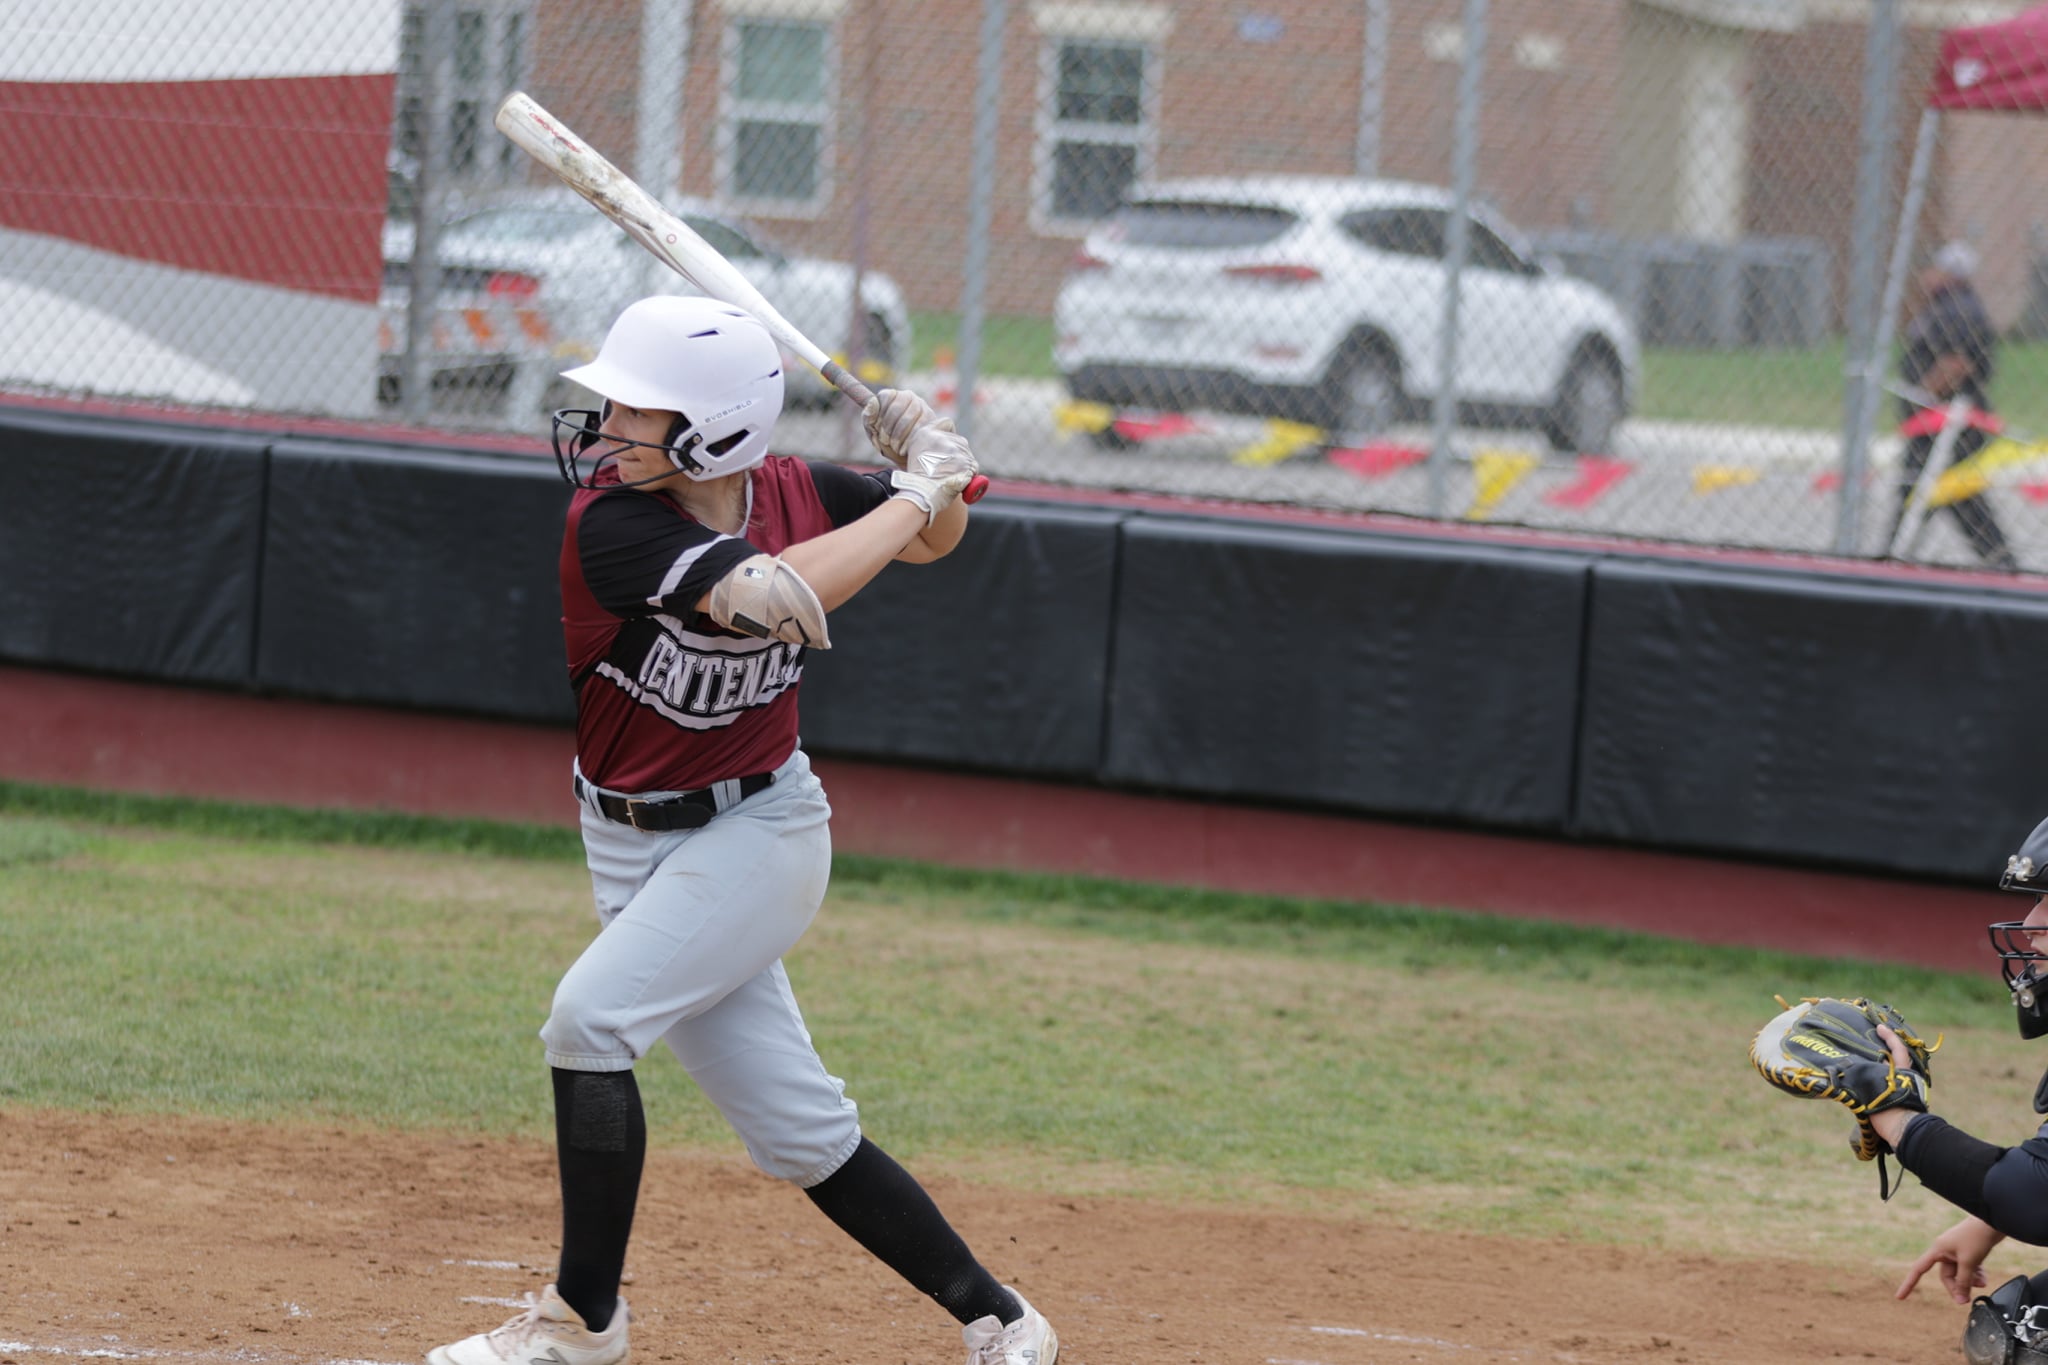 Sophomore McKenzie Cox and the Ladies can clinch a berth in the SCAC Championship this weekend.